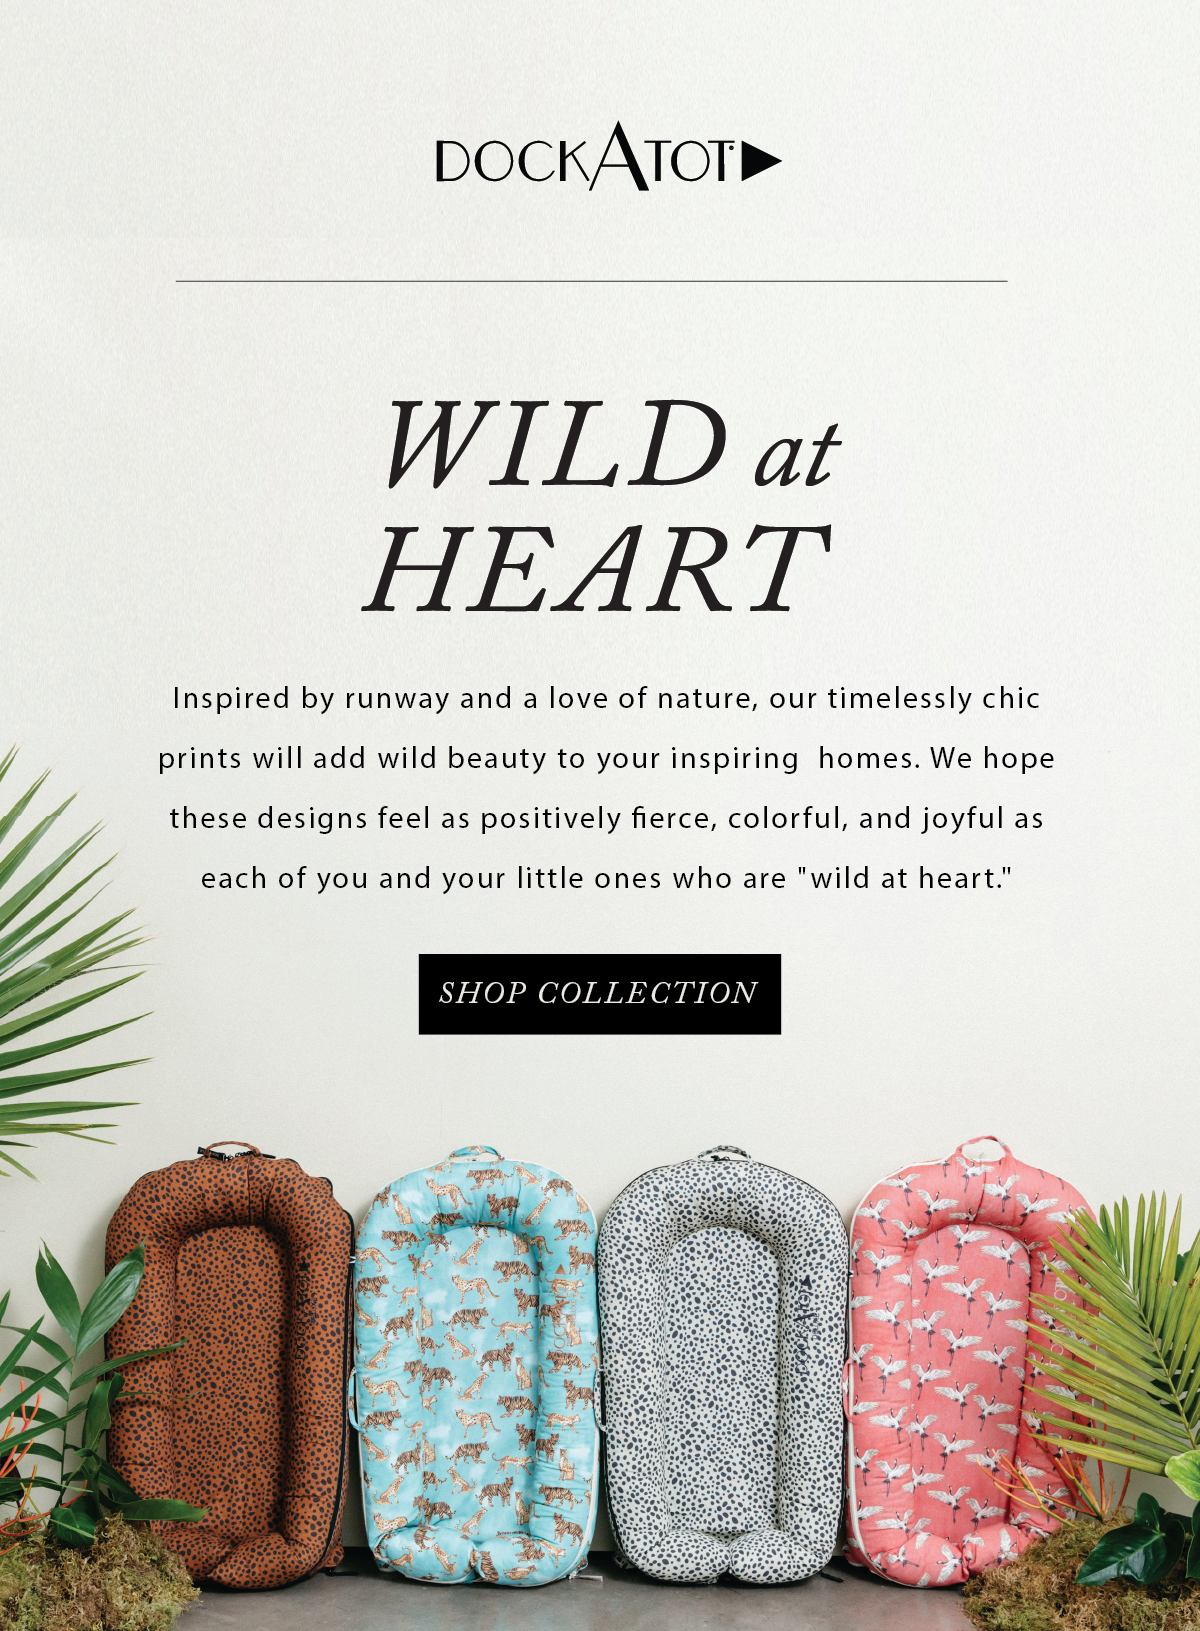 Introducing our new collection, Wild At Heart